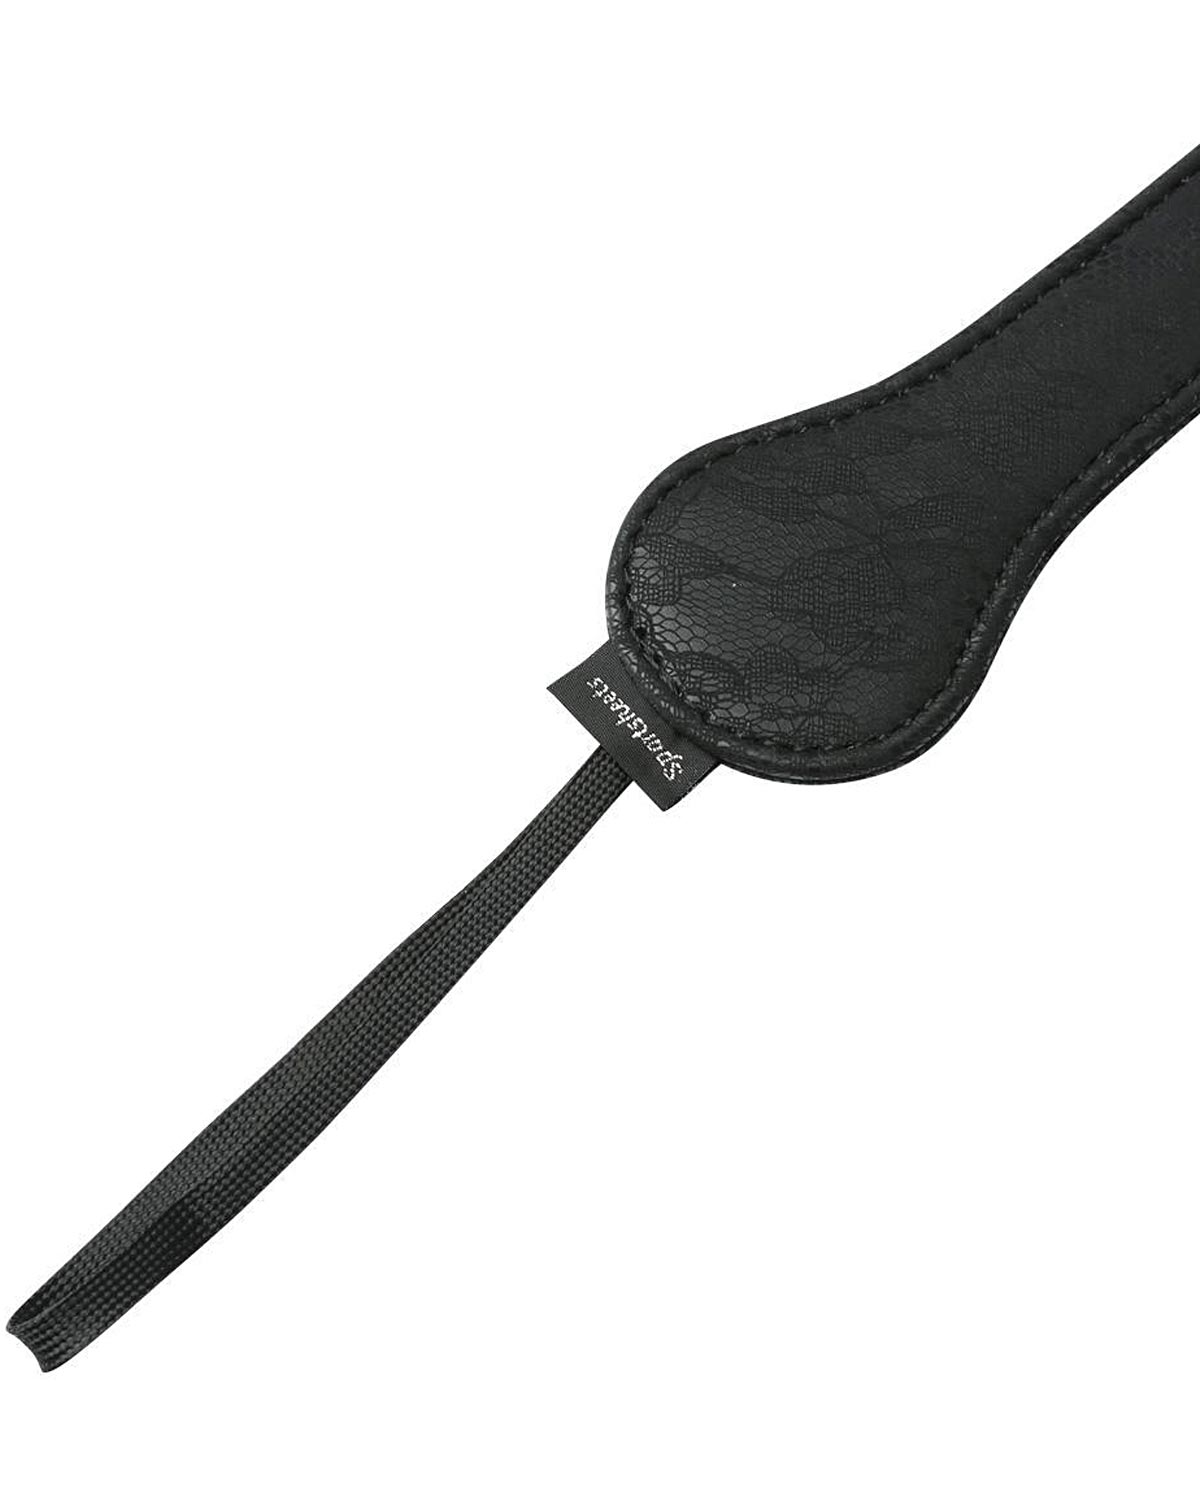 Sportsheets Sincerely Lace 12" Paddle - Fetish